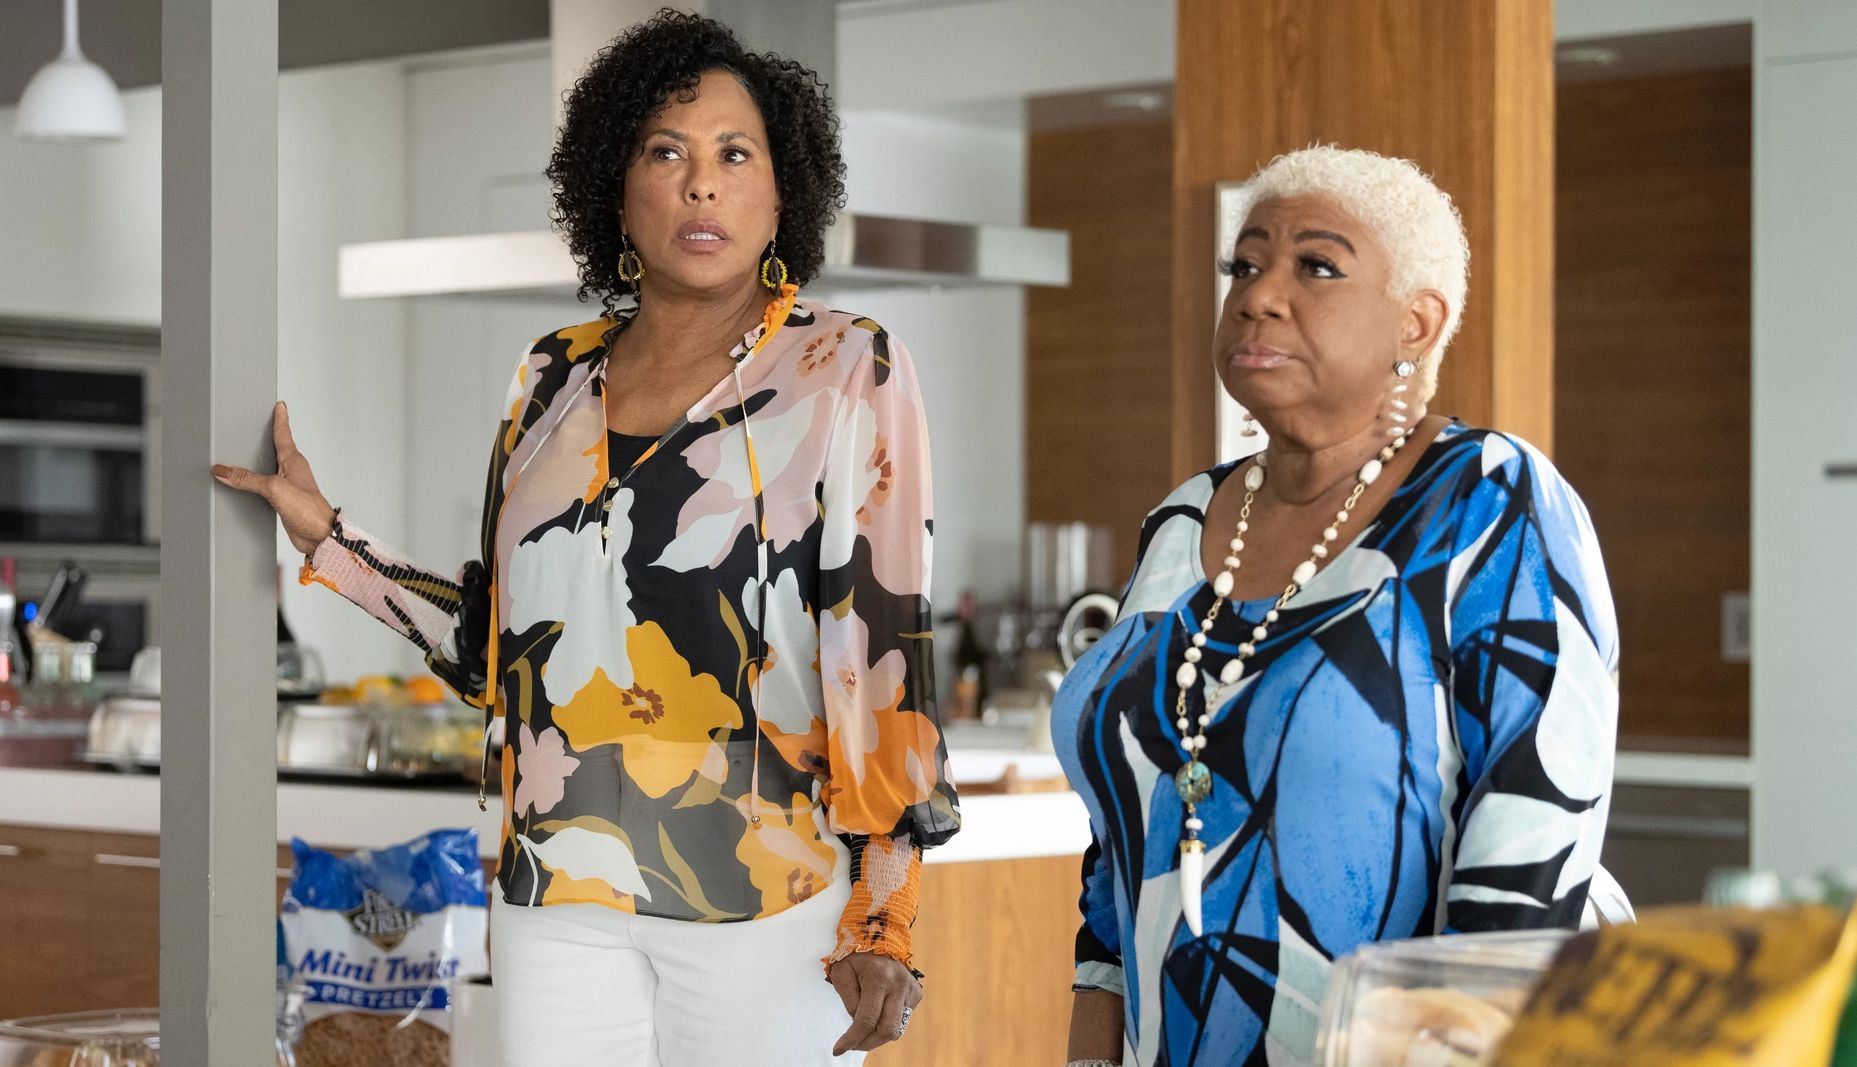 Angela E. Gibbs and Luenell standing next to each other in a scene from Hacks